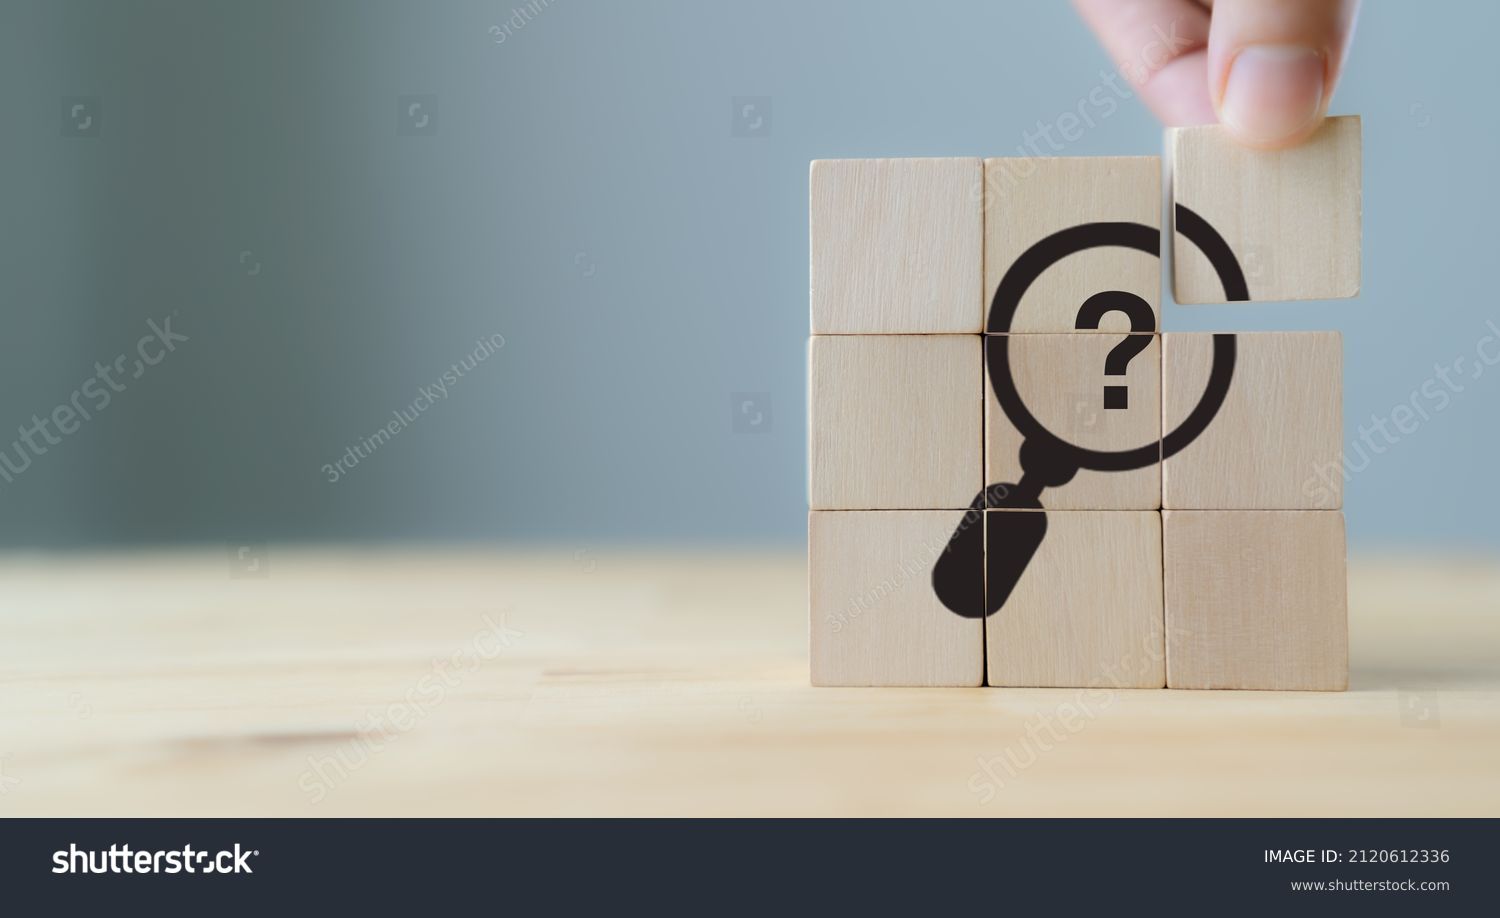 Problems and root cause analysis concept. Define problems to find solution. The wooden cubes with illustration magnifying glass to analyze question mark sign on grey background and copy space. #2120612336